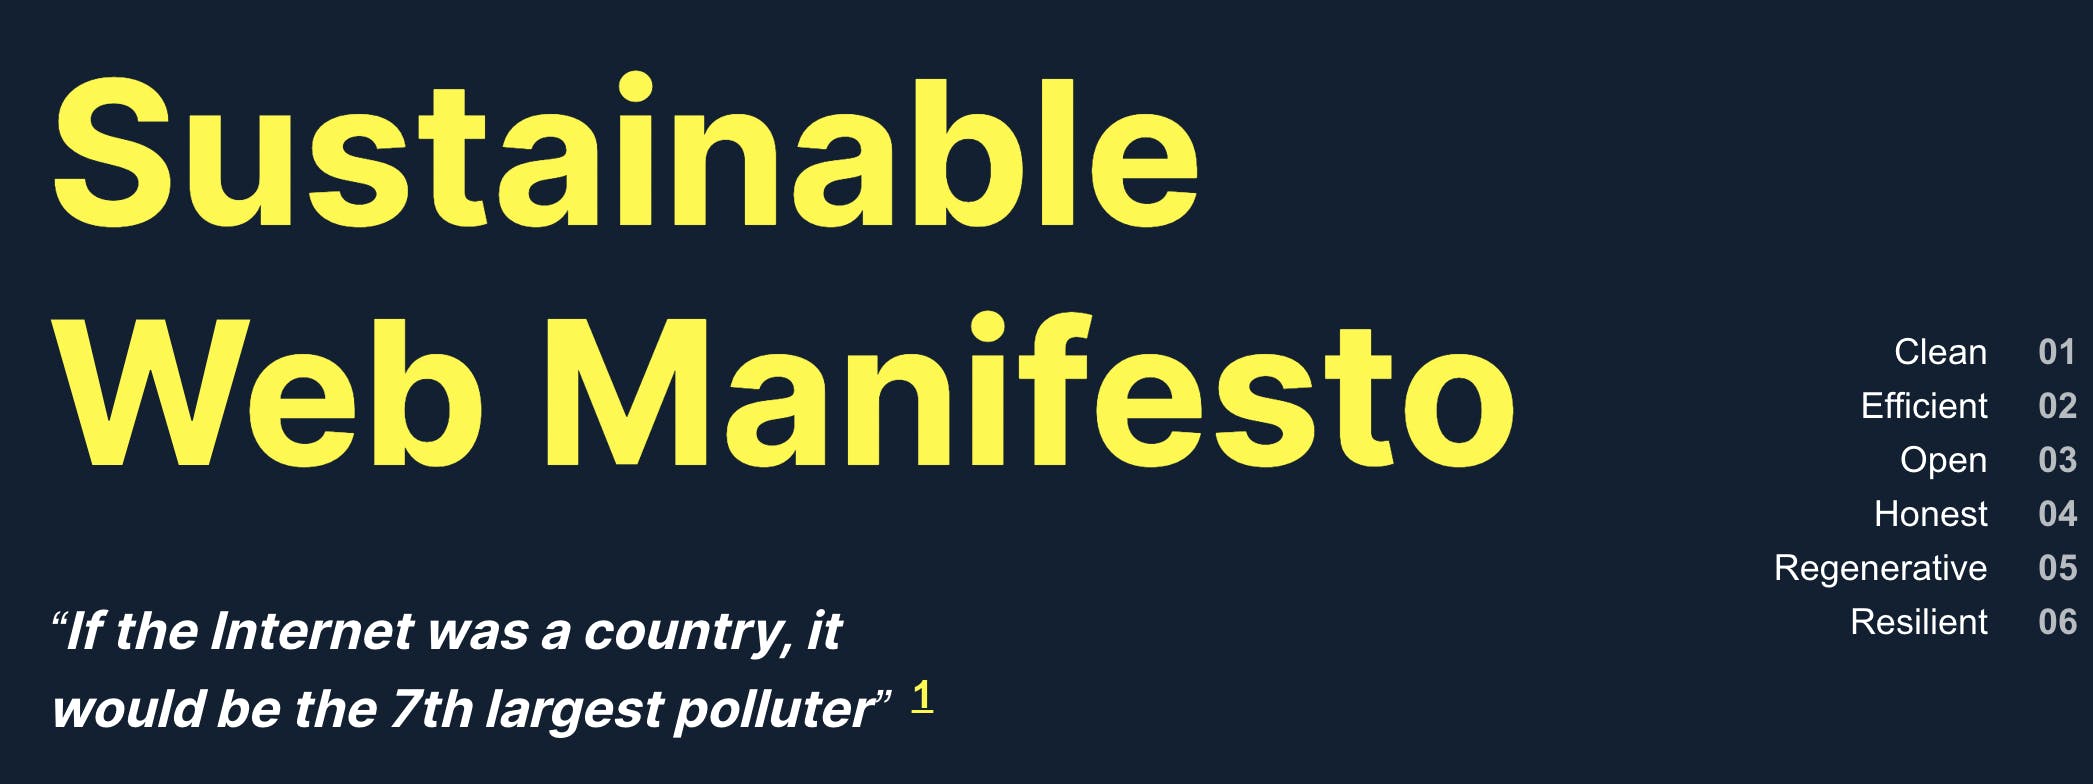 Screenshot of Sustainable Web Manifesto's homepage: dark navy background with "Sustainable Web Manifesto" in bright yellow text aligned to the right. Underneath that the following quote in white text "If the internet was a country, it would be the 7th largest polluter". Aligned to the left side of the image, the categories of the manifesto are listed in white text: "Clean 01, Efficient 02, Open 03, Honest 04, Regenerative 05, Resilient 06". 